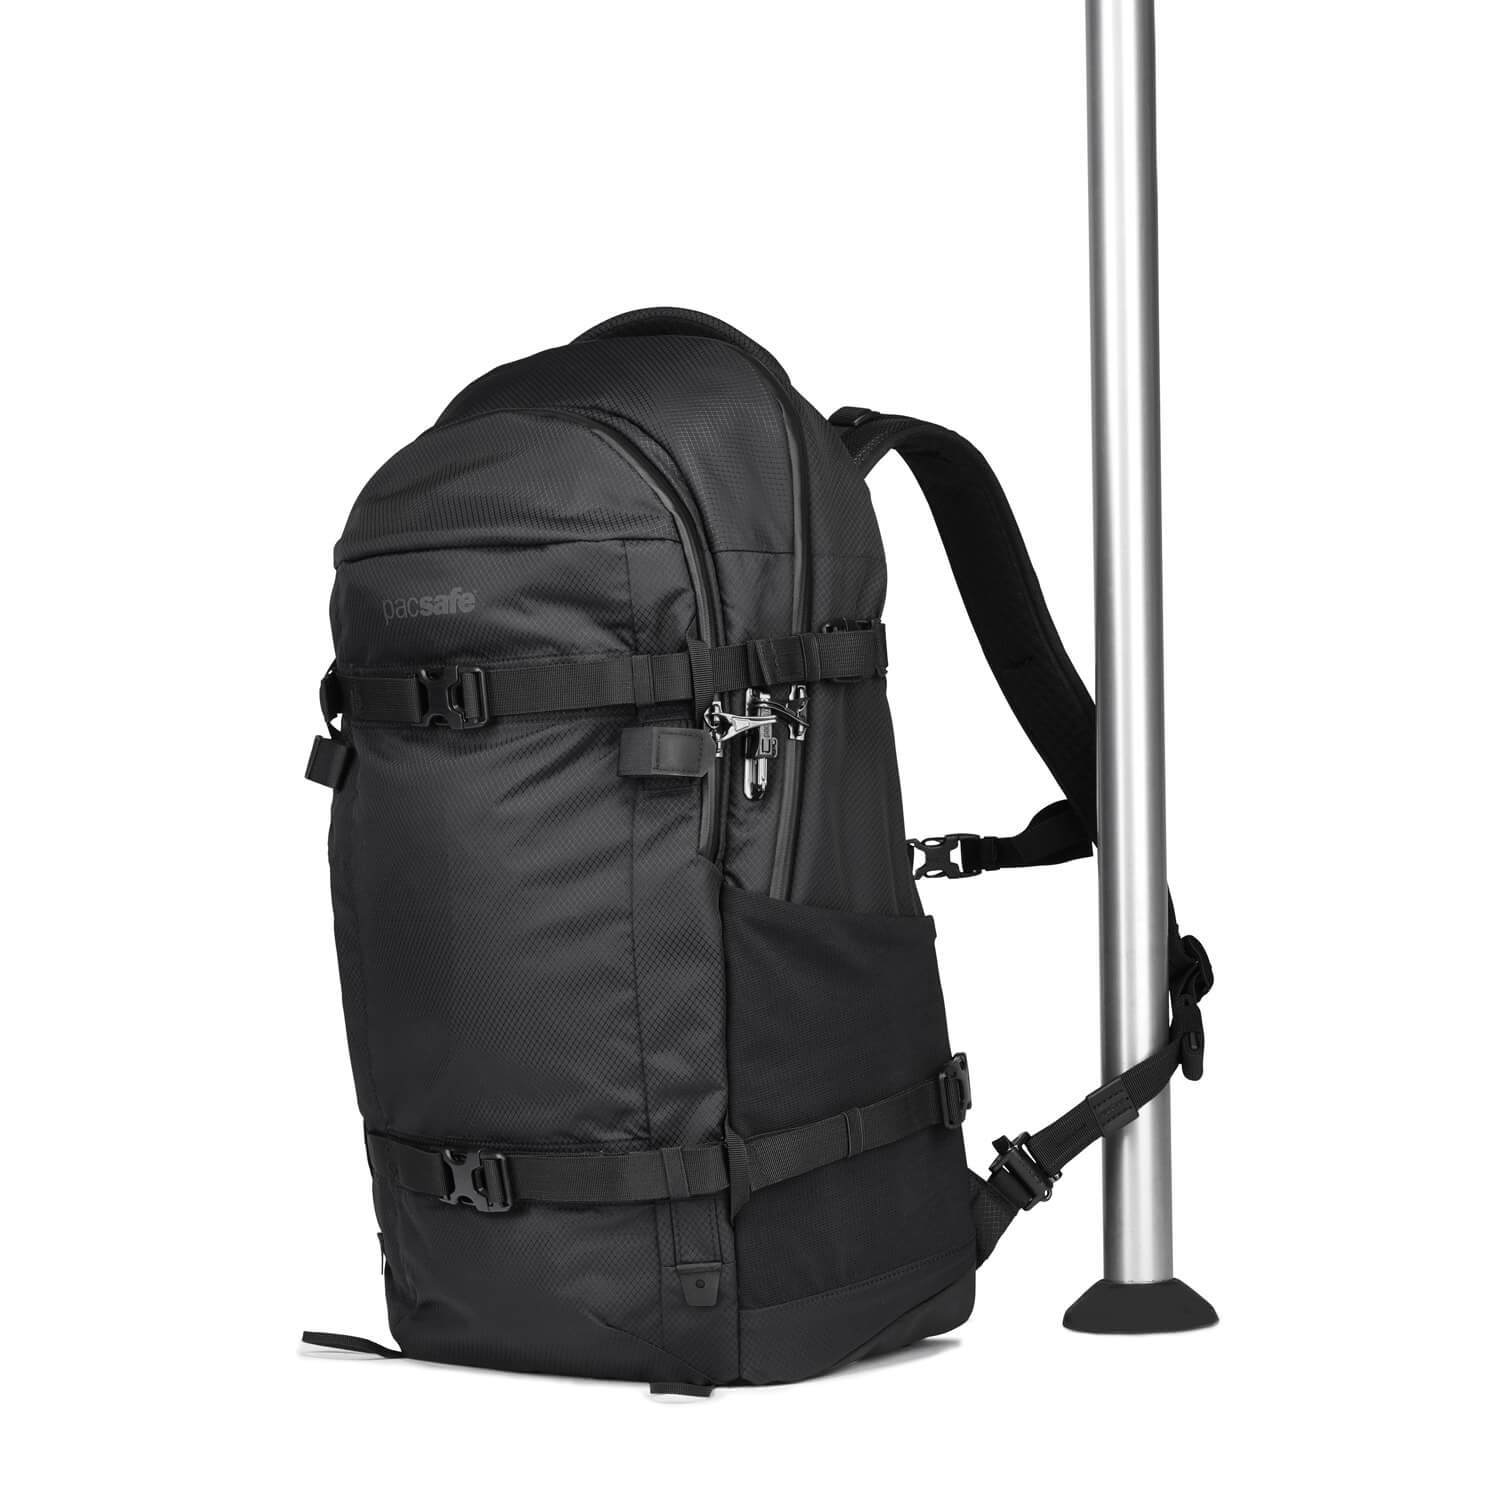 Anti-theft Backpack  Venturesafe® EXP45 in Black by Pacsafe